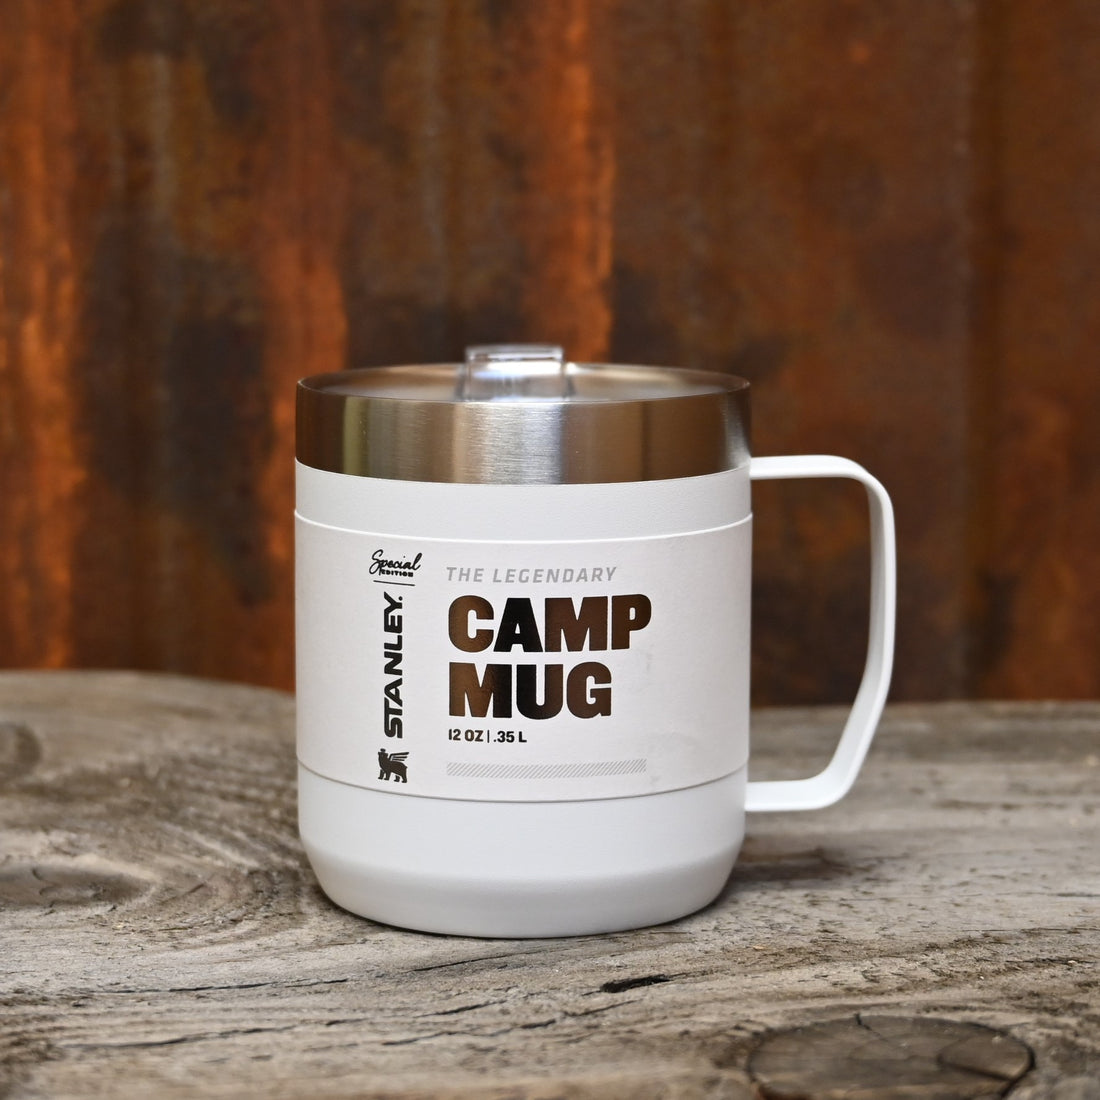 Stanley The Stay Hot Camp Mug in Polar view of mug